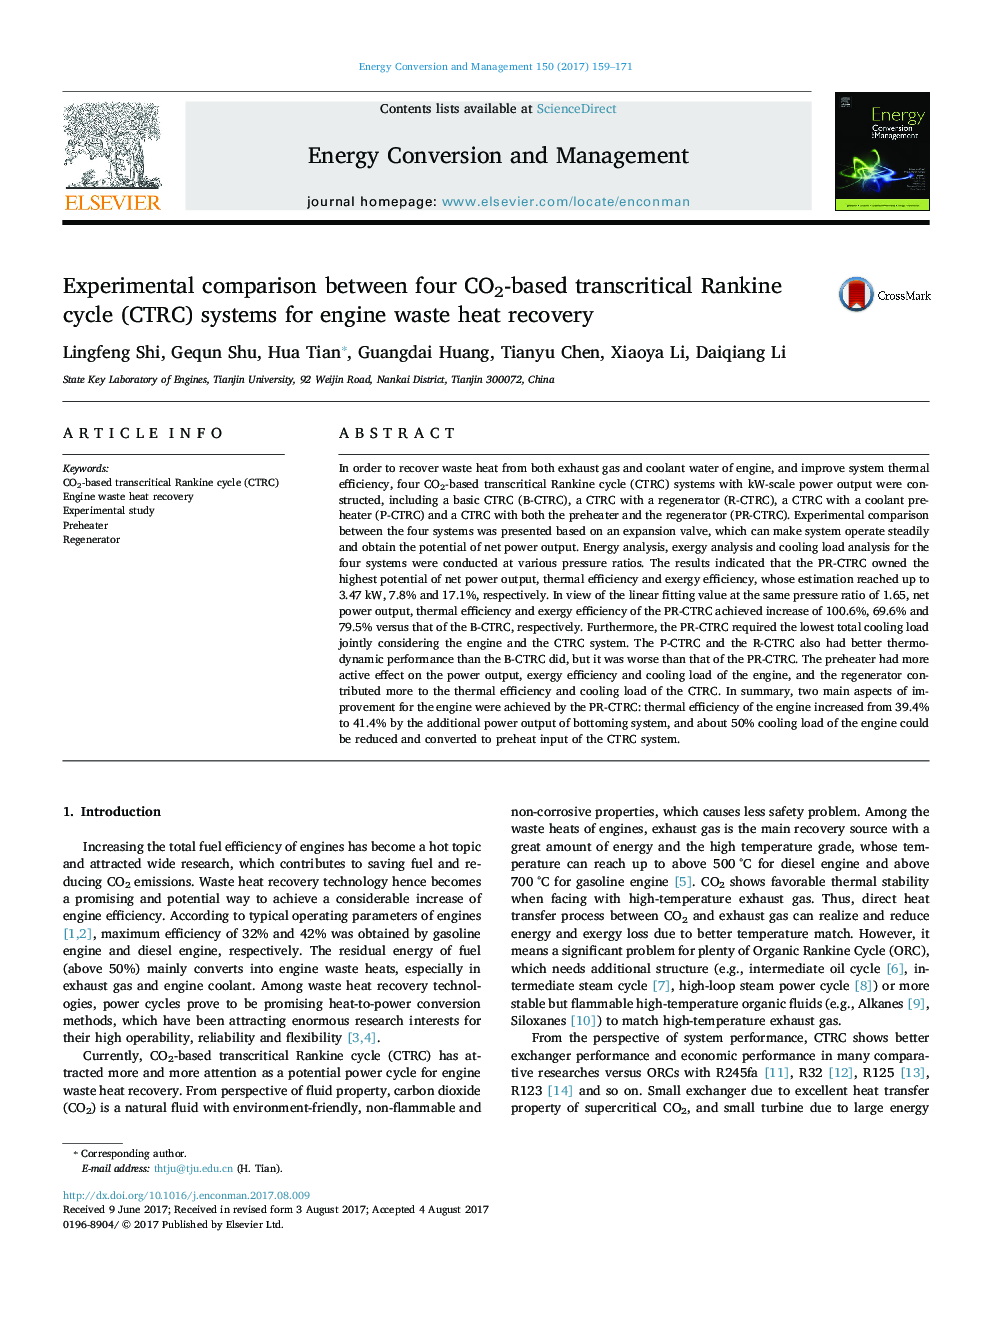 Experimental comparison between four CO2-based transcritical Rankine cycle (CTRC) systems for engine waste heat recovery